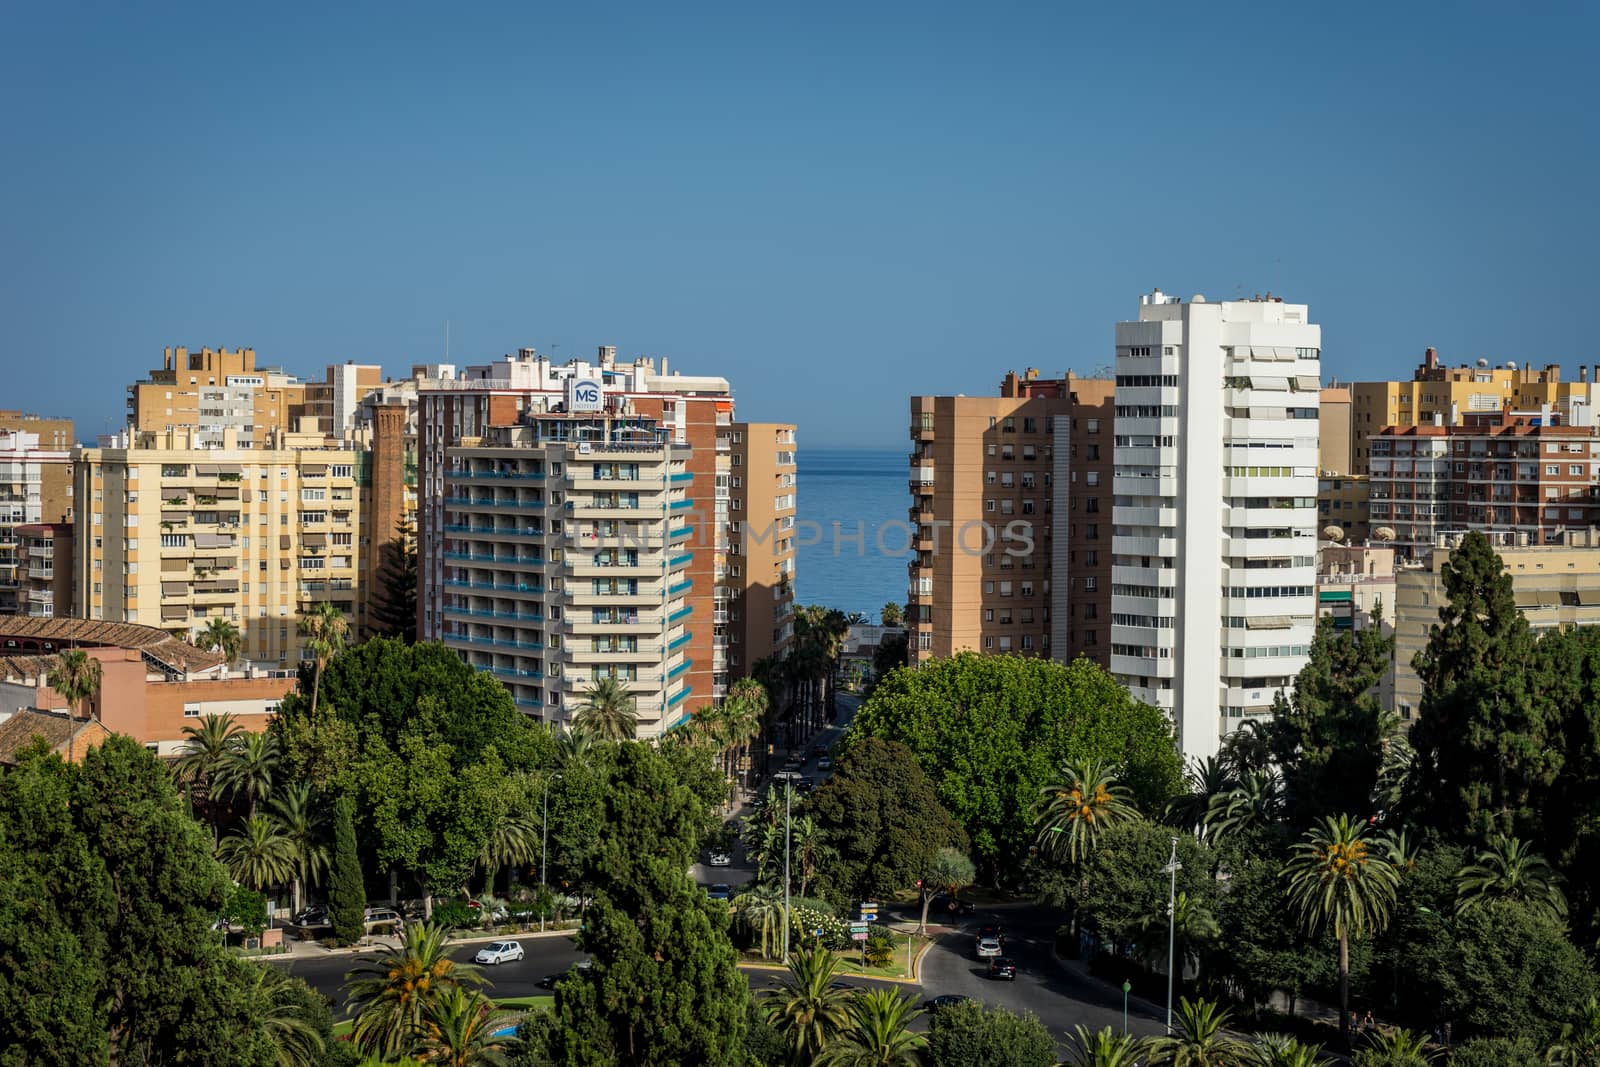 City skyline of Malaga overlooking the sea ocean in Malaga, Spain, Europe on a bright summer day with blue skies